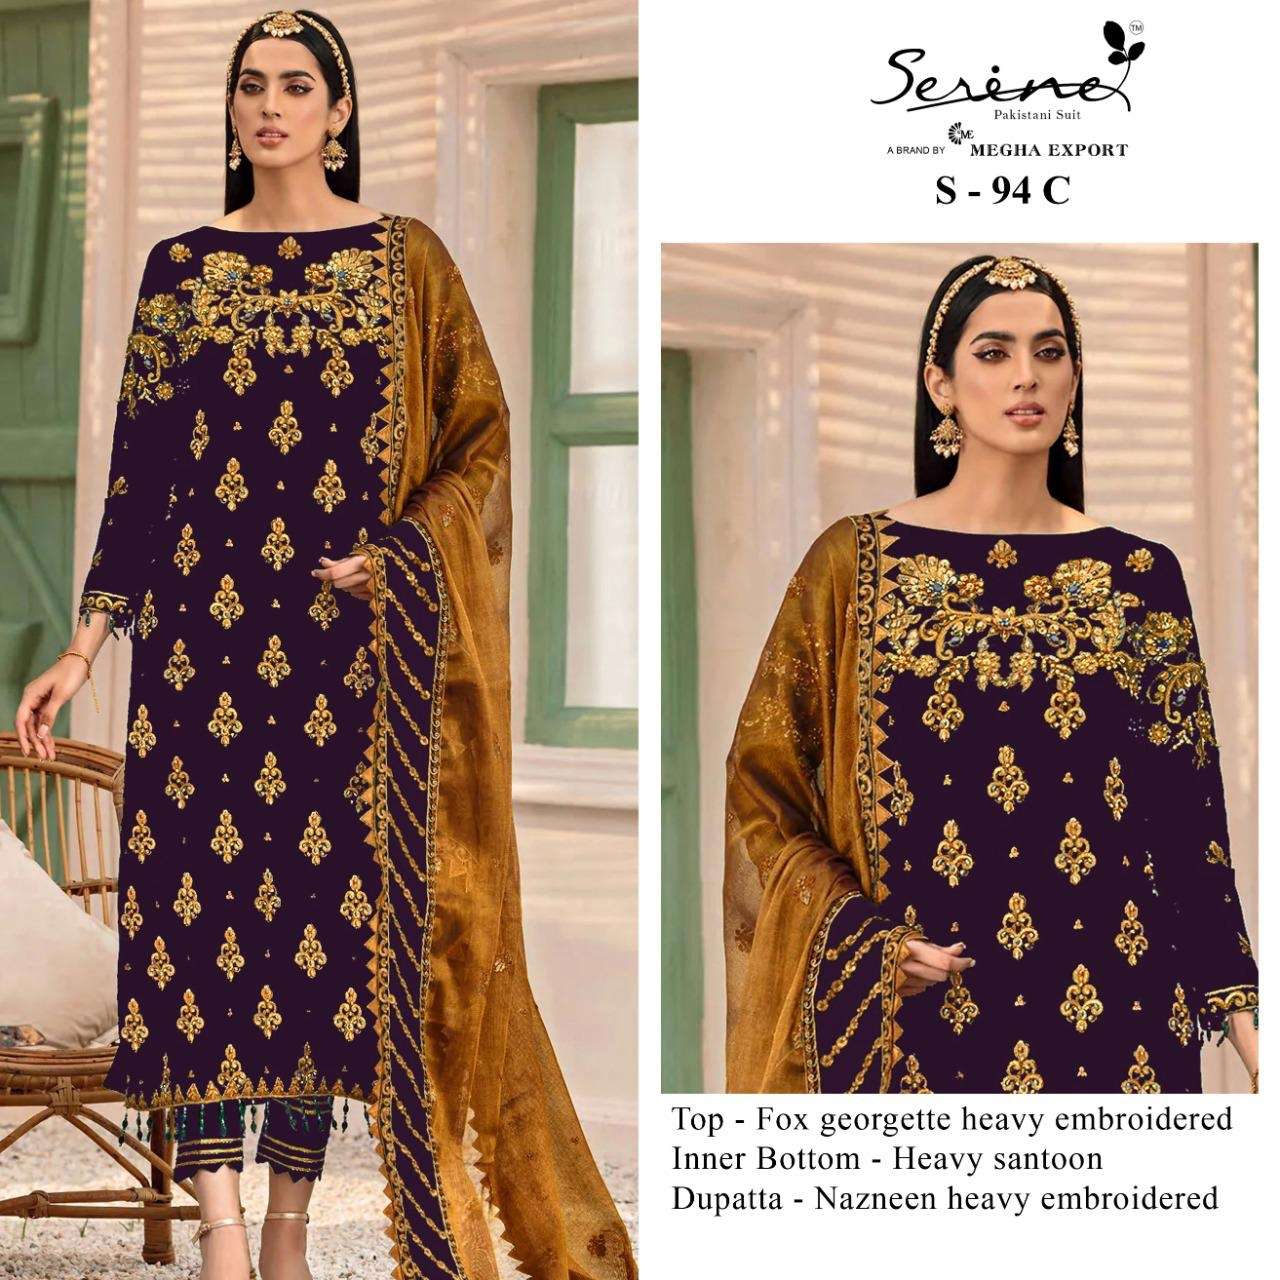 serine s-94 faux georgette with embroidered pakistani salwar kameez latest collection 